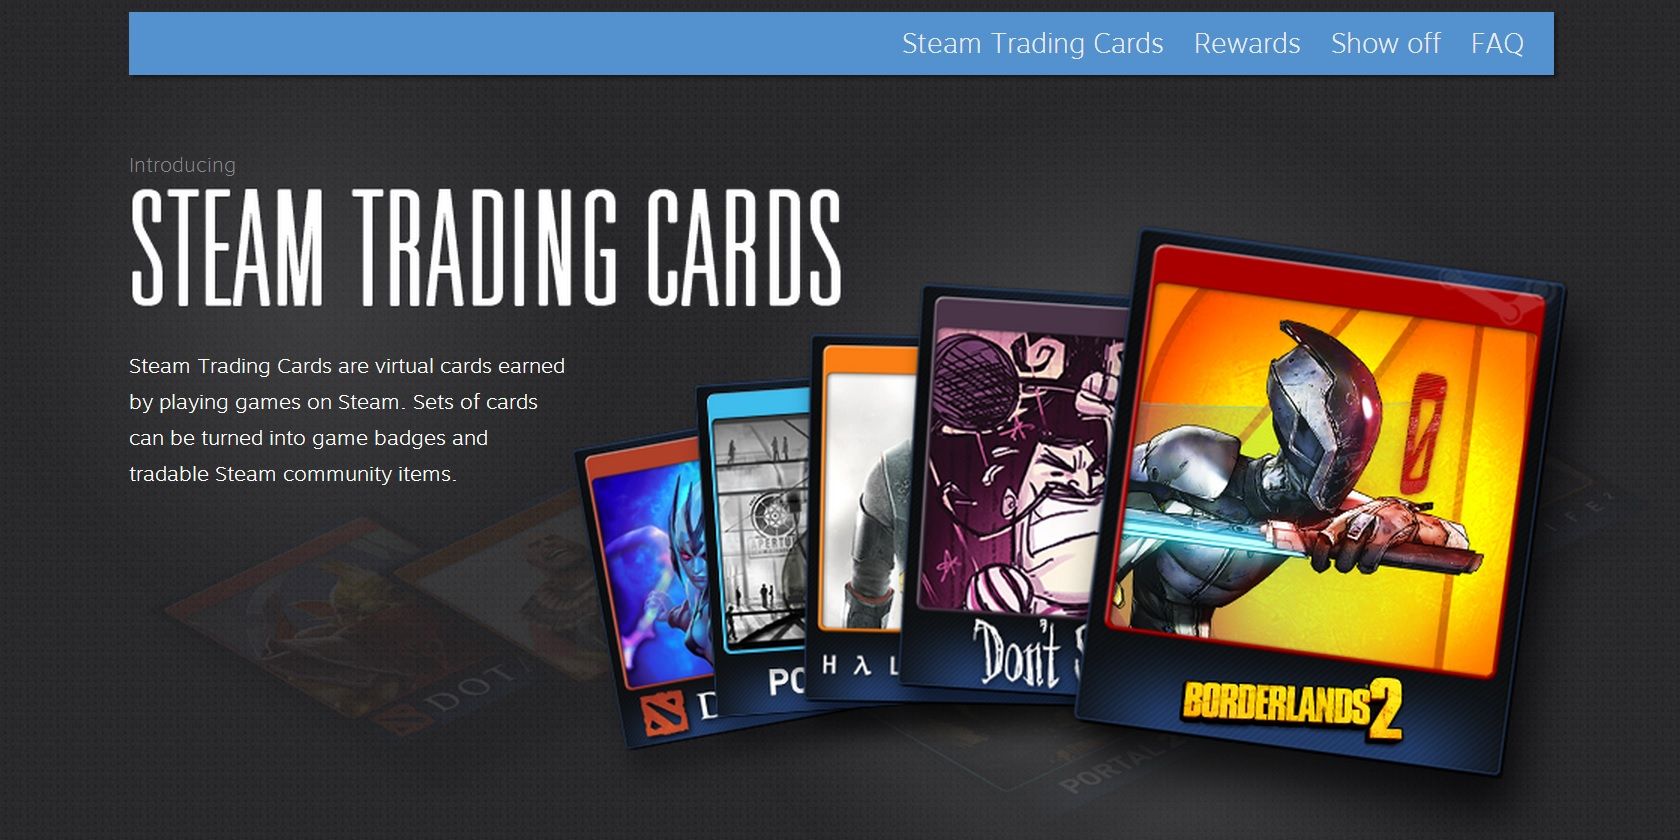 How I became obsessed with Steam Trading Cards – Destructoid